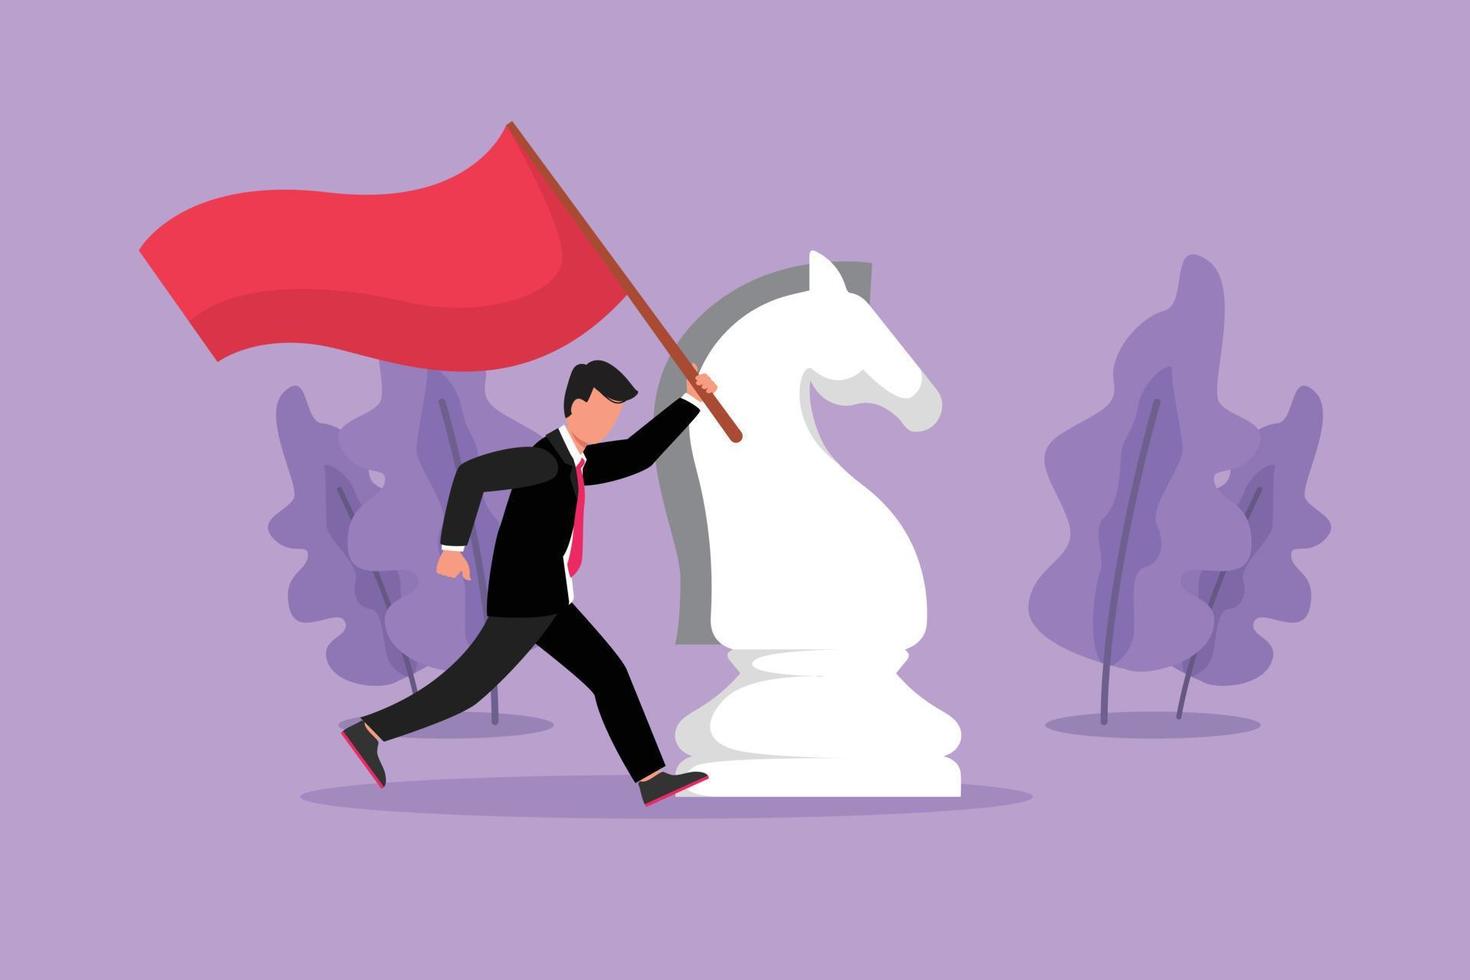 Graphic flat design drawing of happy businessman running and holding flag beside big horse knight chess. Business achievement goal, win competition. Metaphor concept. Cartoon style vector illustration